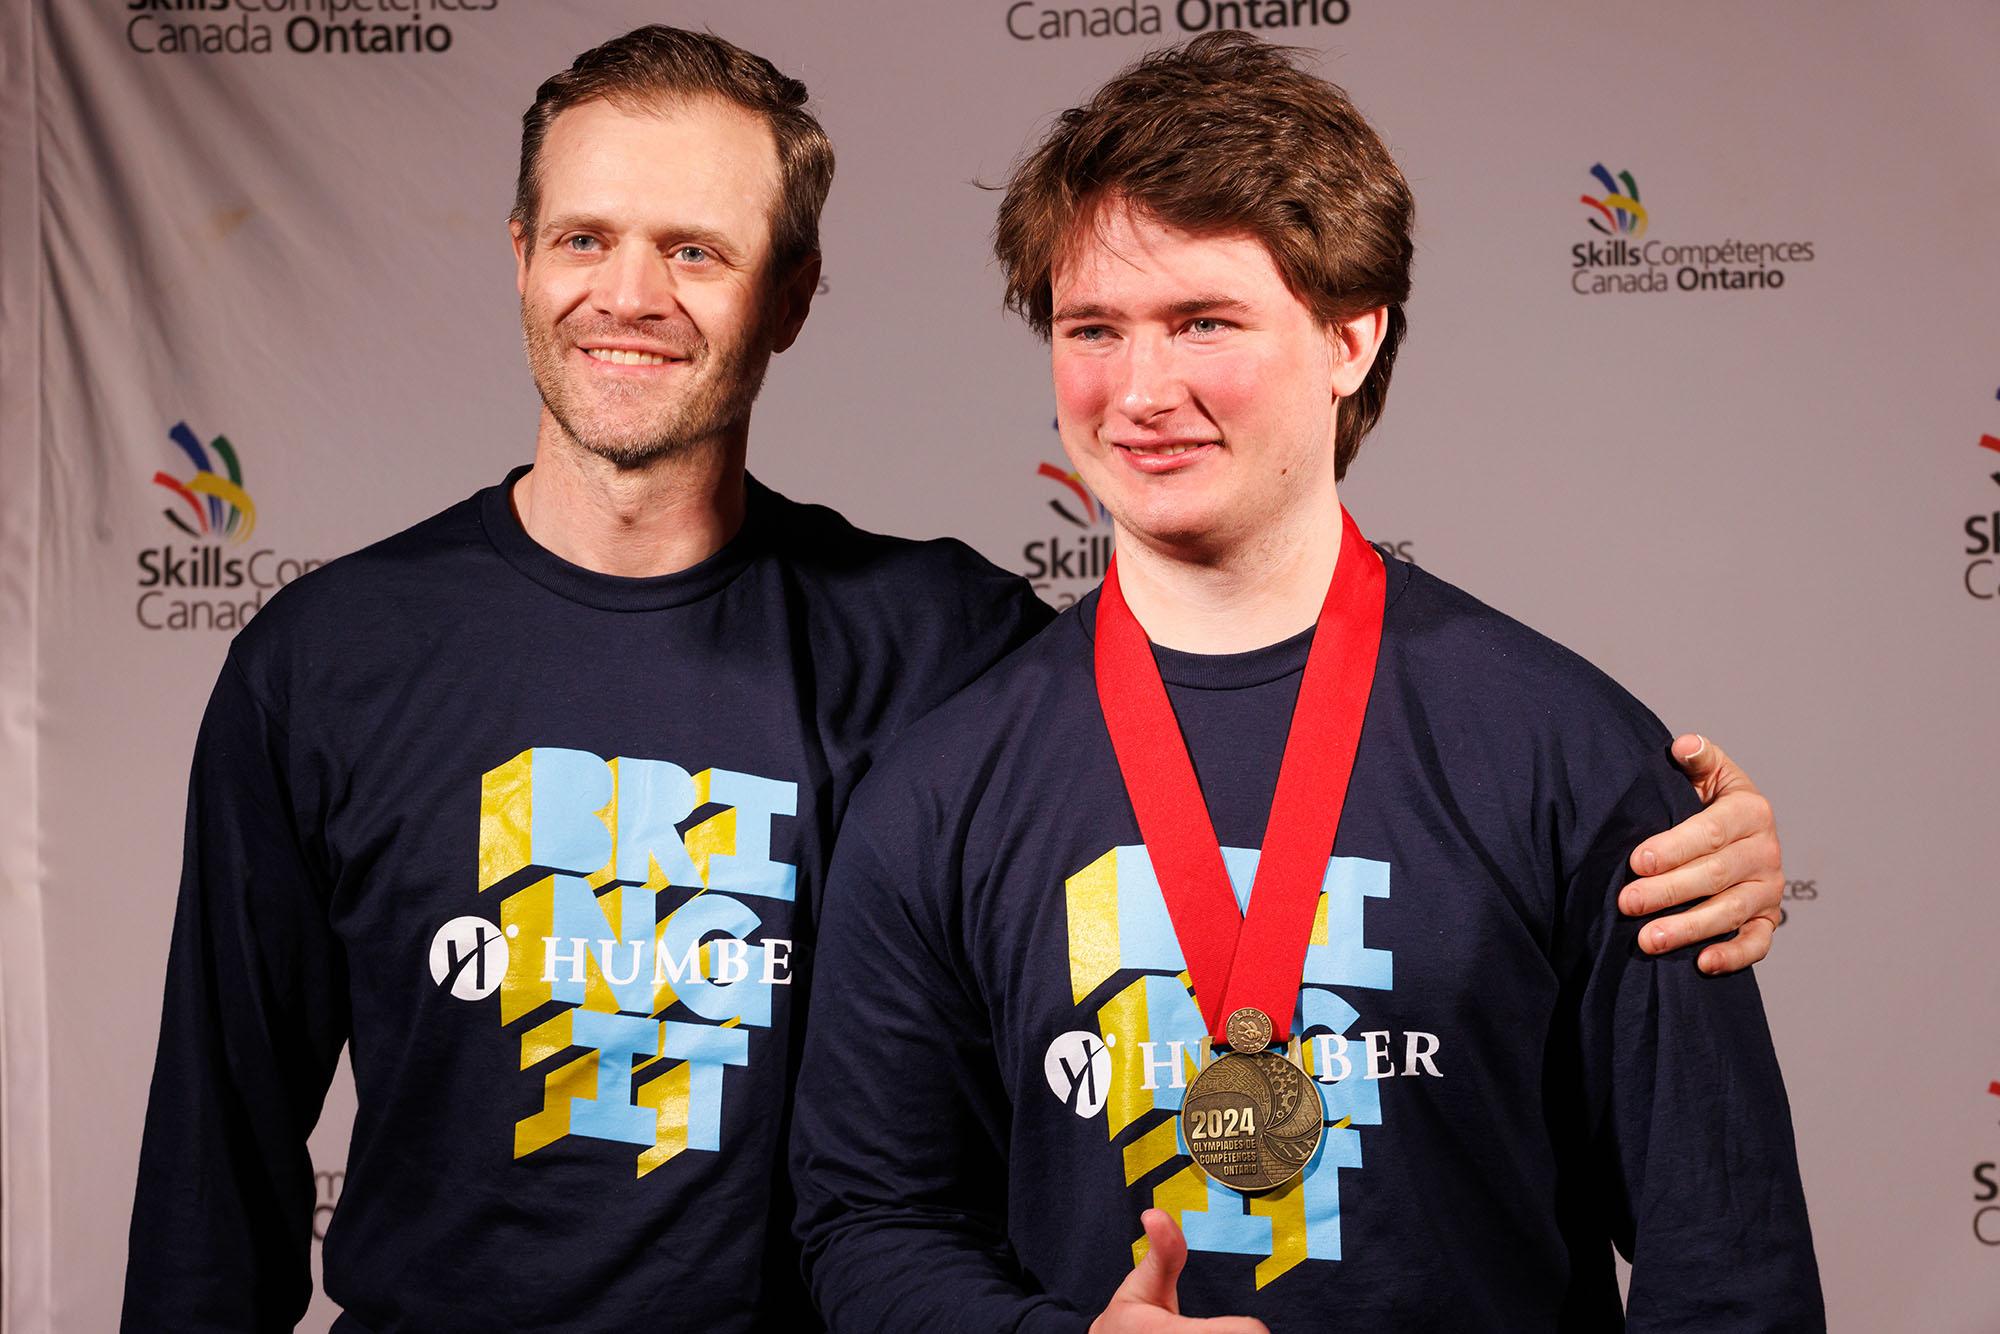 Two people wearing Humber shirts, one of whom is wearing a medal around their neck.